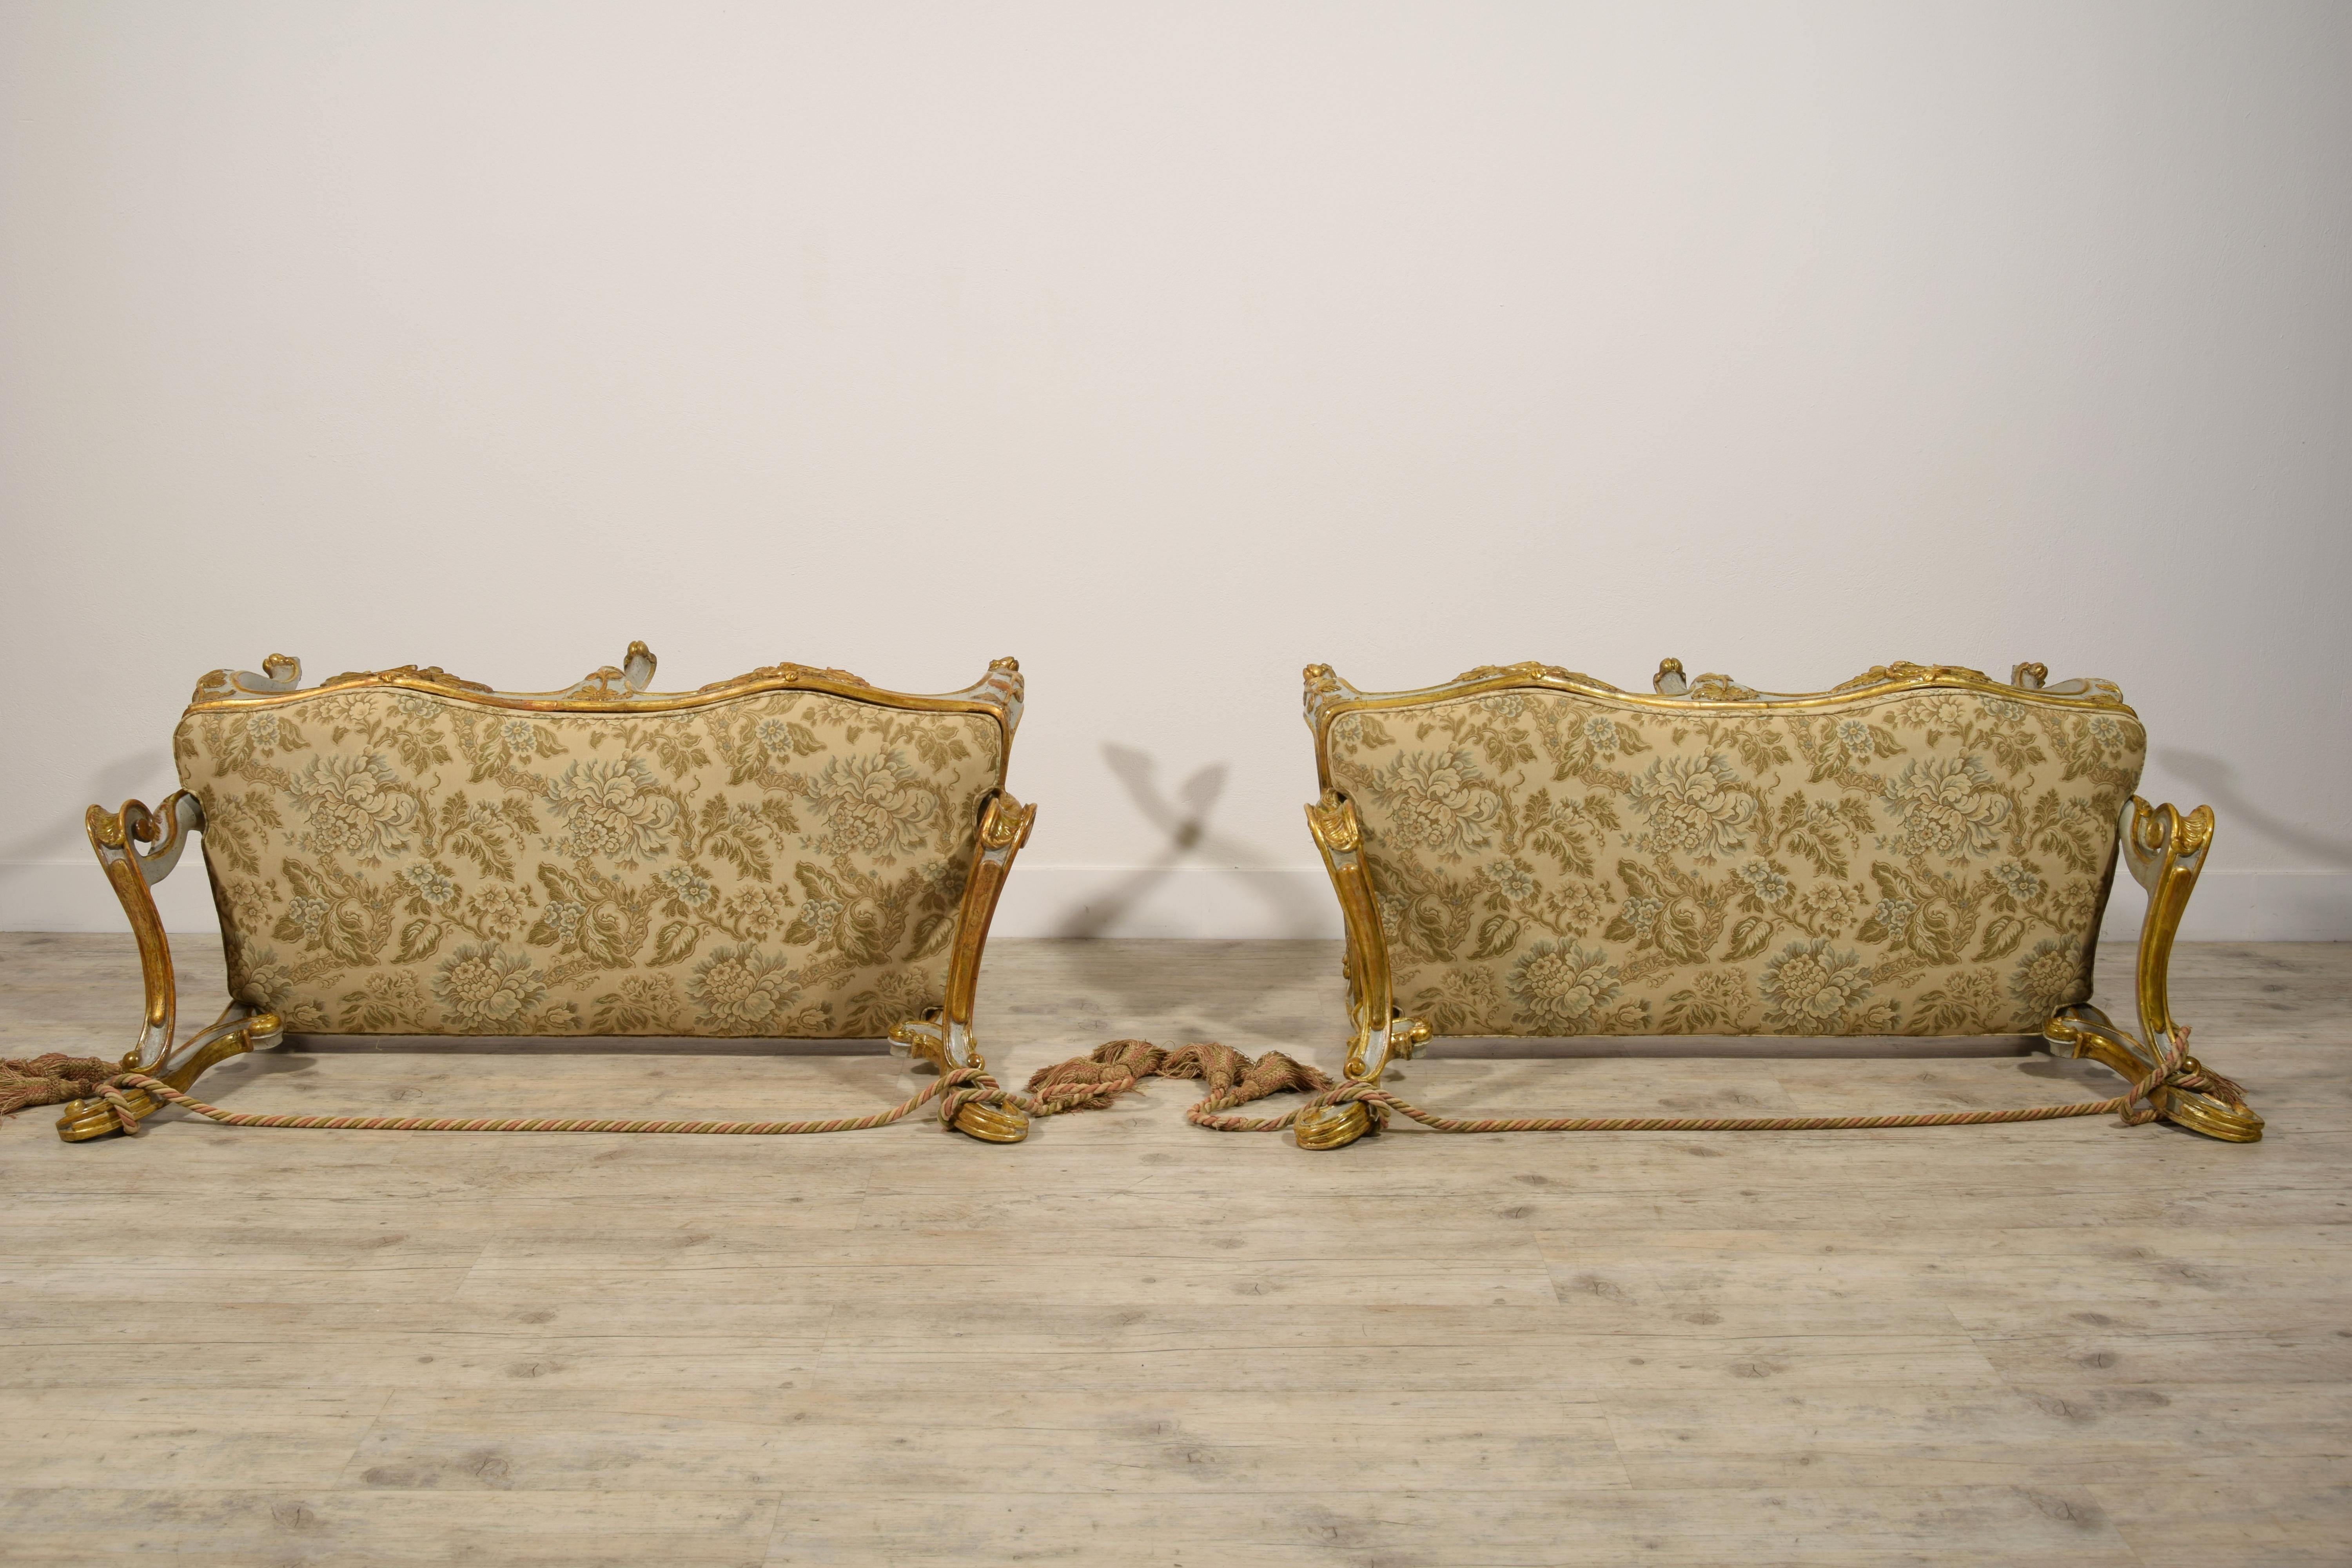 18th Century, Pair of Italian Baroque Lacquered and Gilt Wood Benches For Sale 4